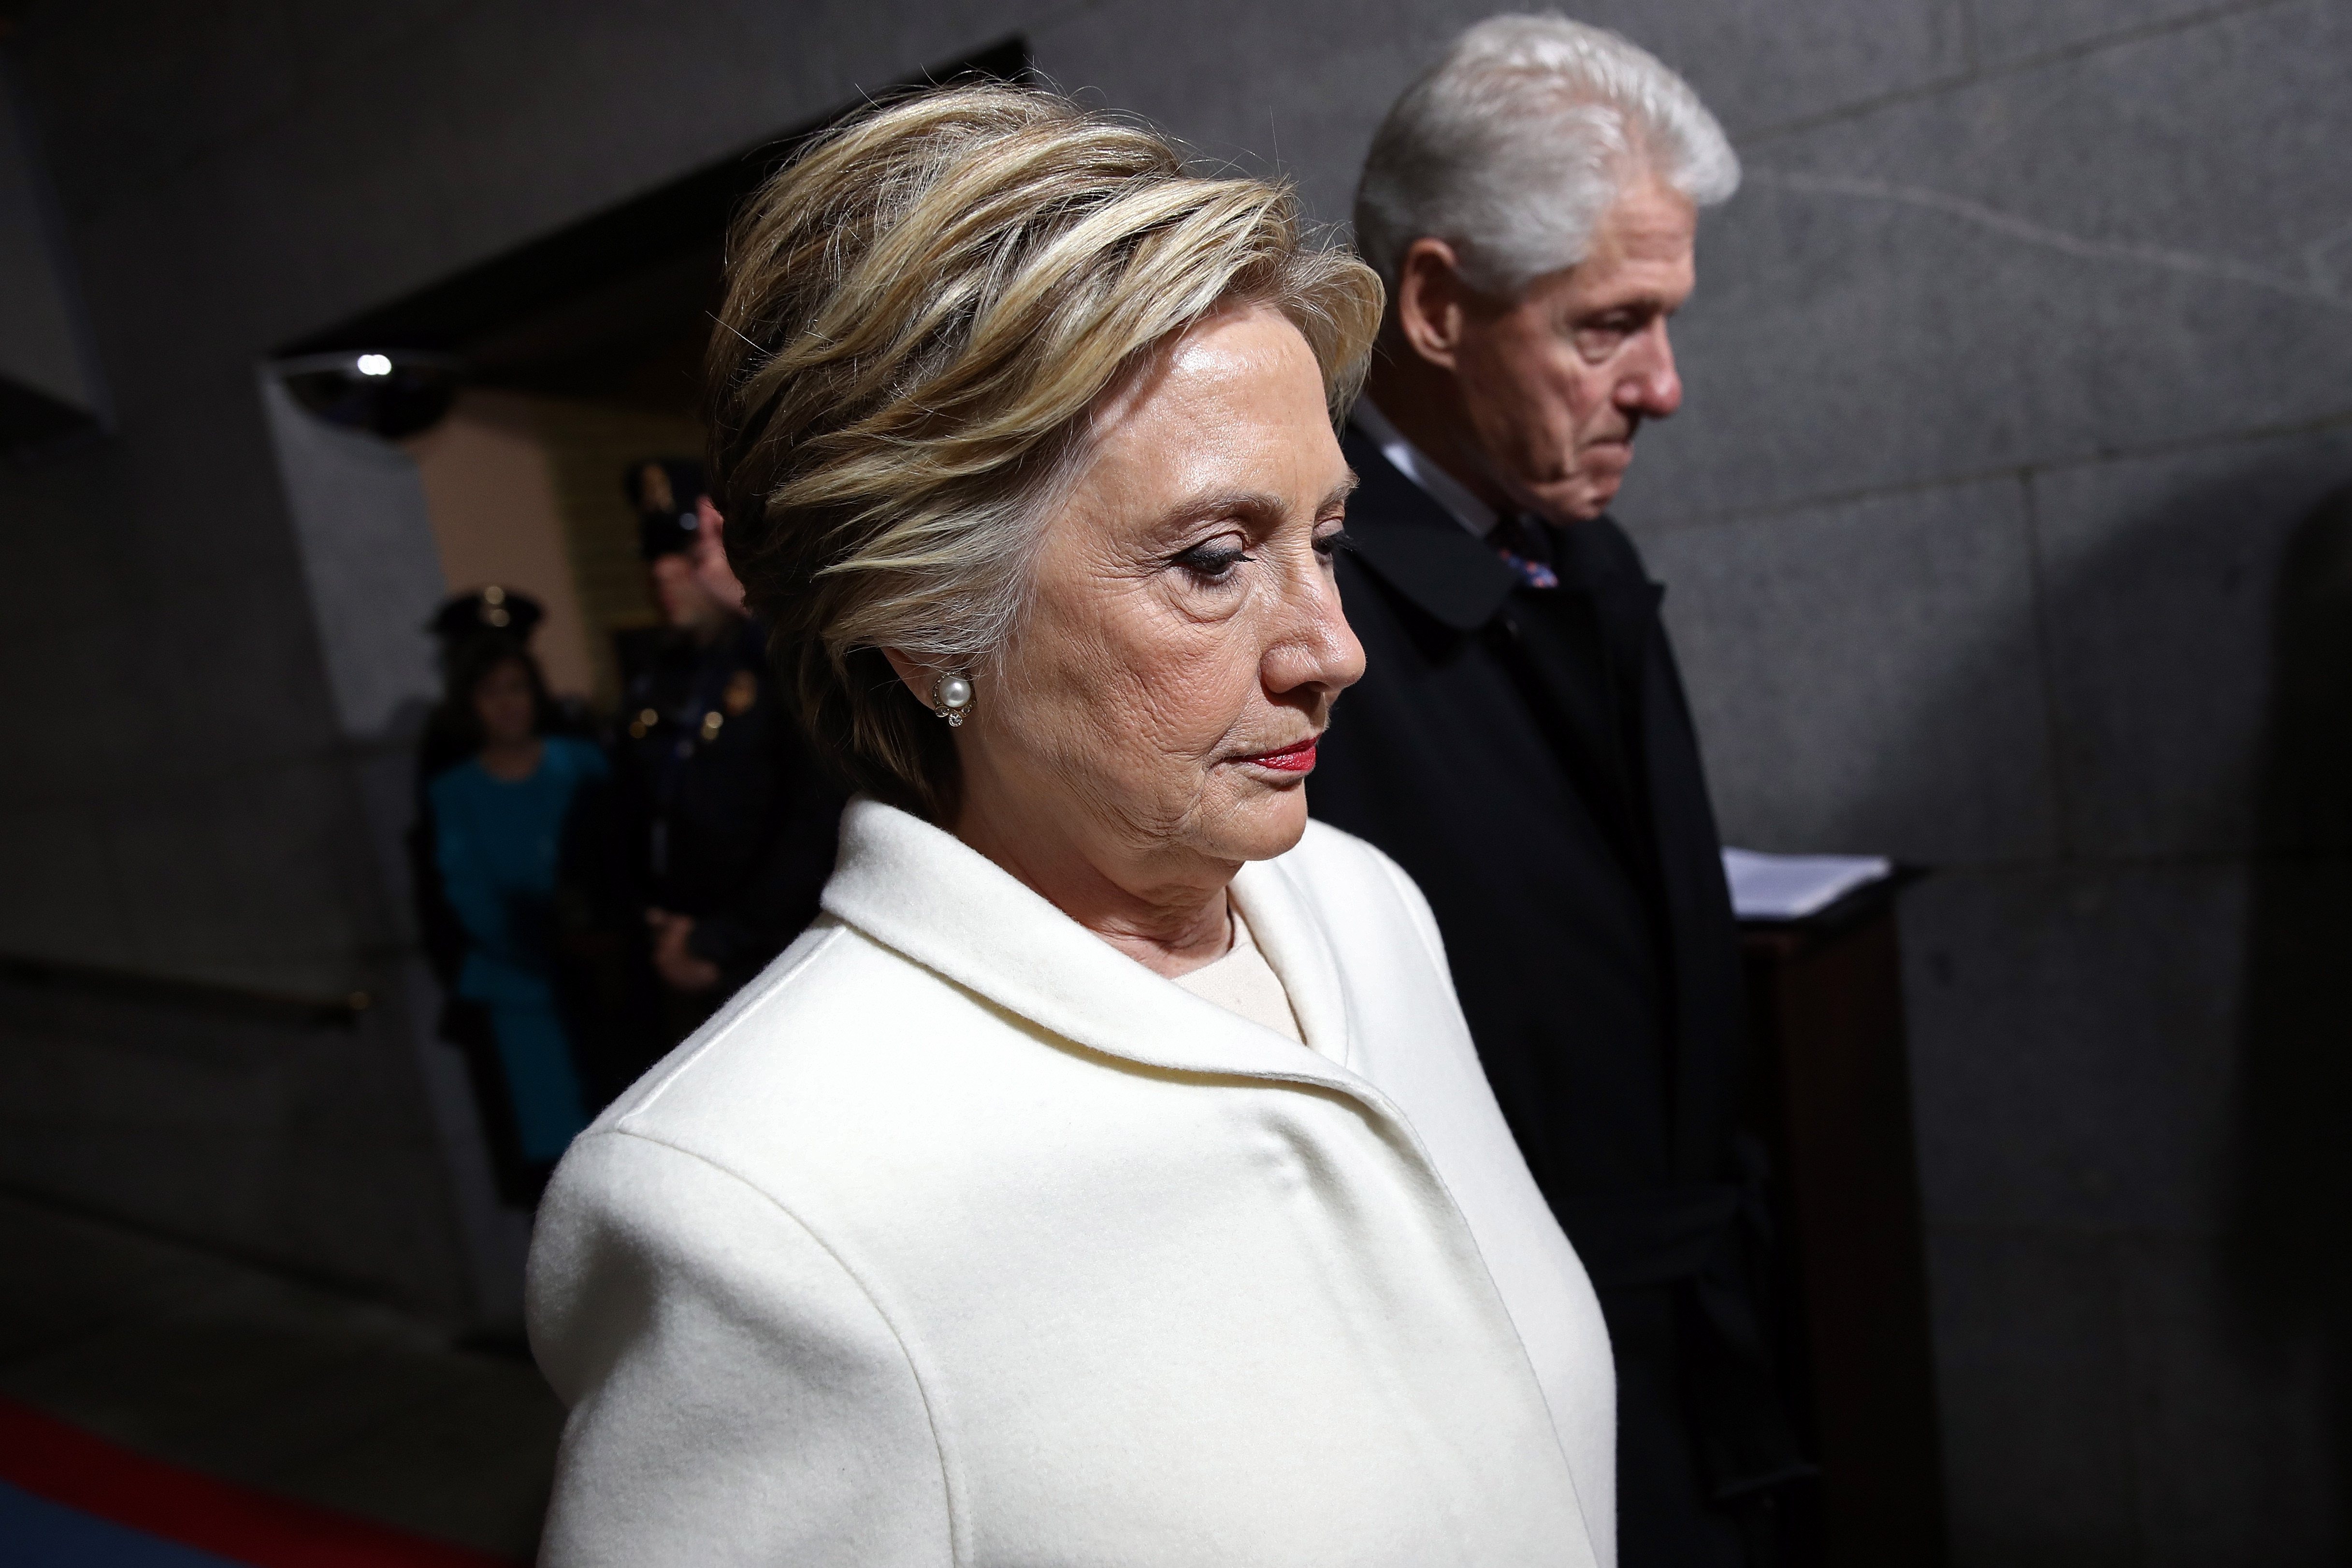 WASHINGTON, DC - JANUARY 20: Former Democratic presidential nominee Hillary Clinton (L) and former President Bill Clinton arrive on the West Front of the U.S. Capitol on January 20, 2017 in Washington, DC. In today's inauguration ceremony Donald J. Trump becomes the 45th president of the United States. (Photo by Win McNamee/Getty Images)